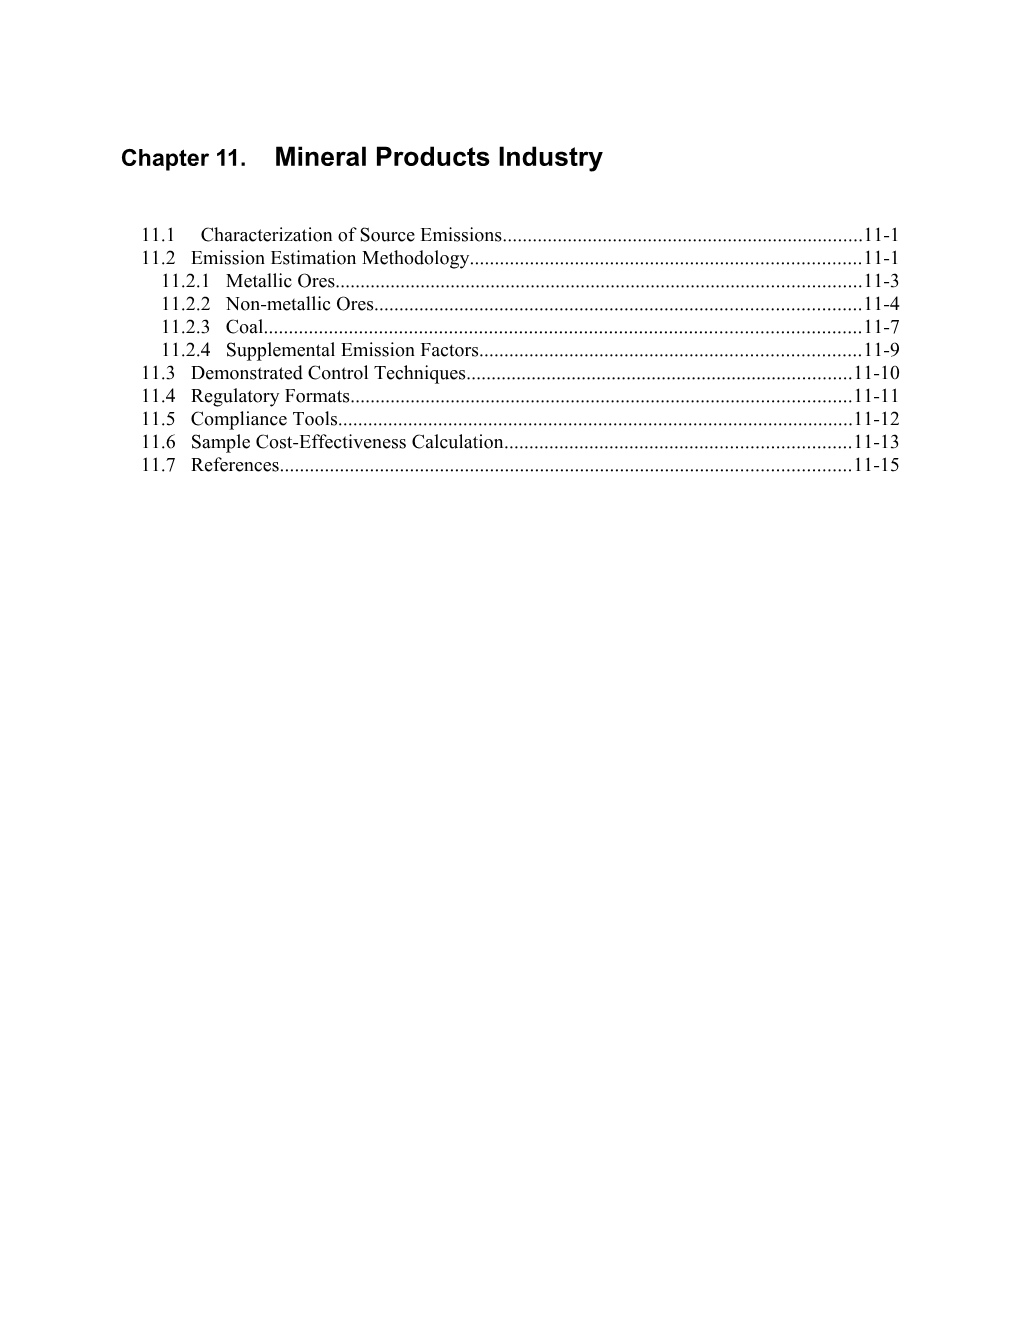 Chapter 11. Mineral Products Industry